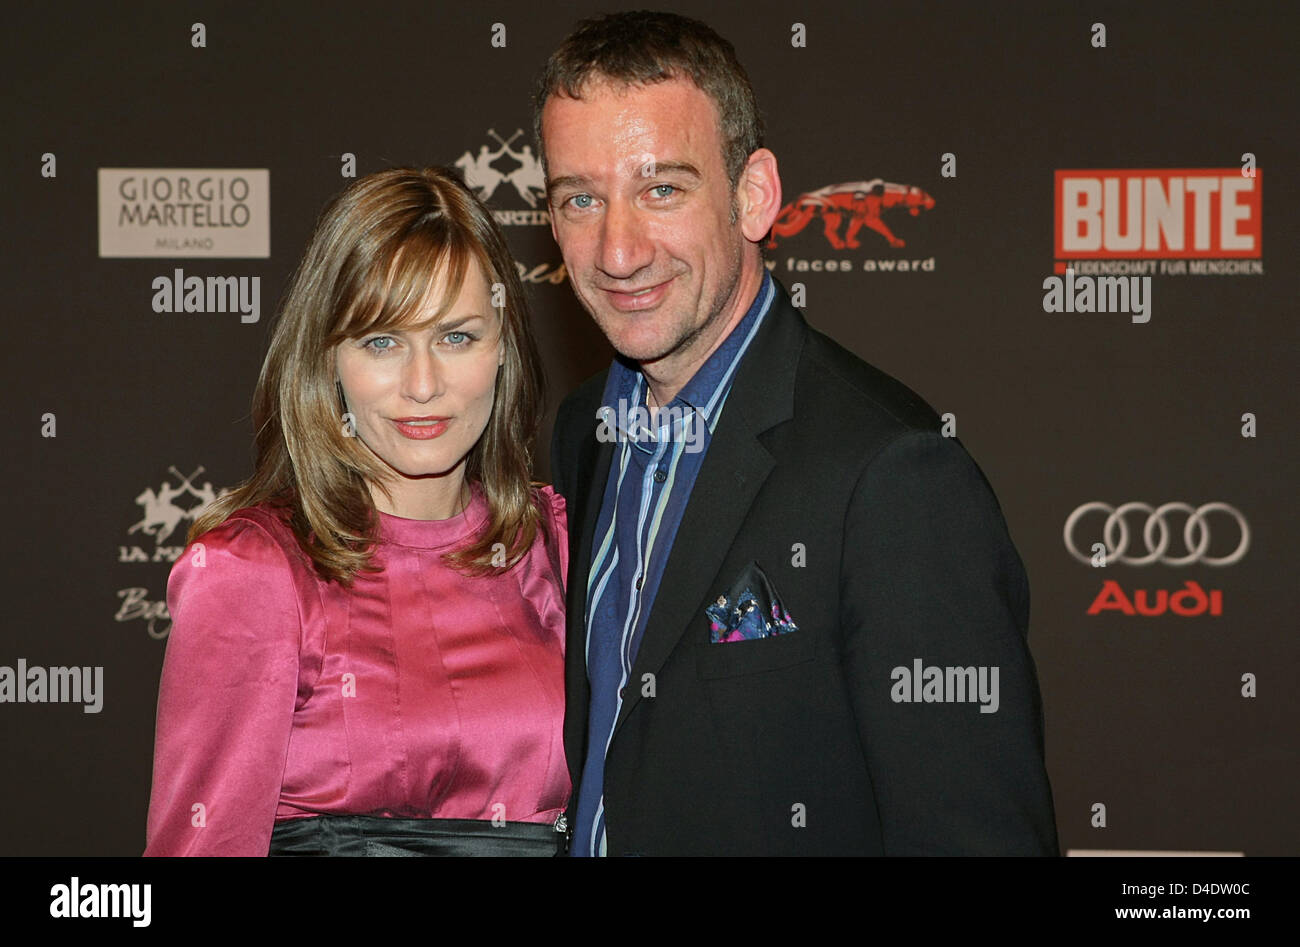 German actress Gesine Cukrowski and her colleague Heio von Stetten arrive at the presentation of the tenth New Faces Award in Berlin, Germany, 24 April 2008. The New Faces Award recognises creative offspring actors. Photo: Soeren Stache Stock Photo